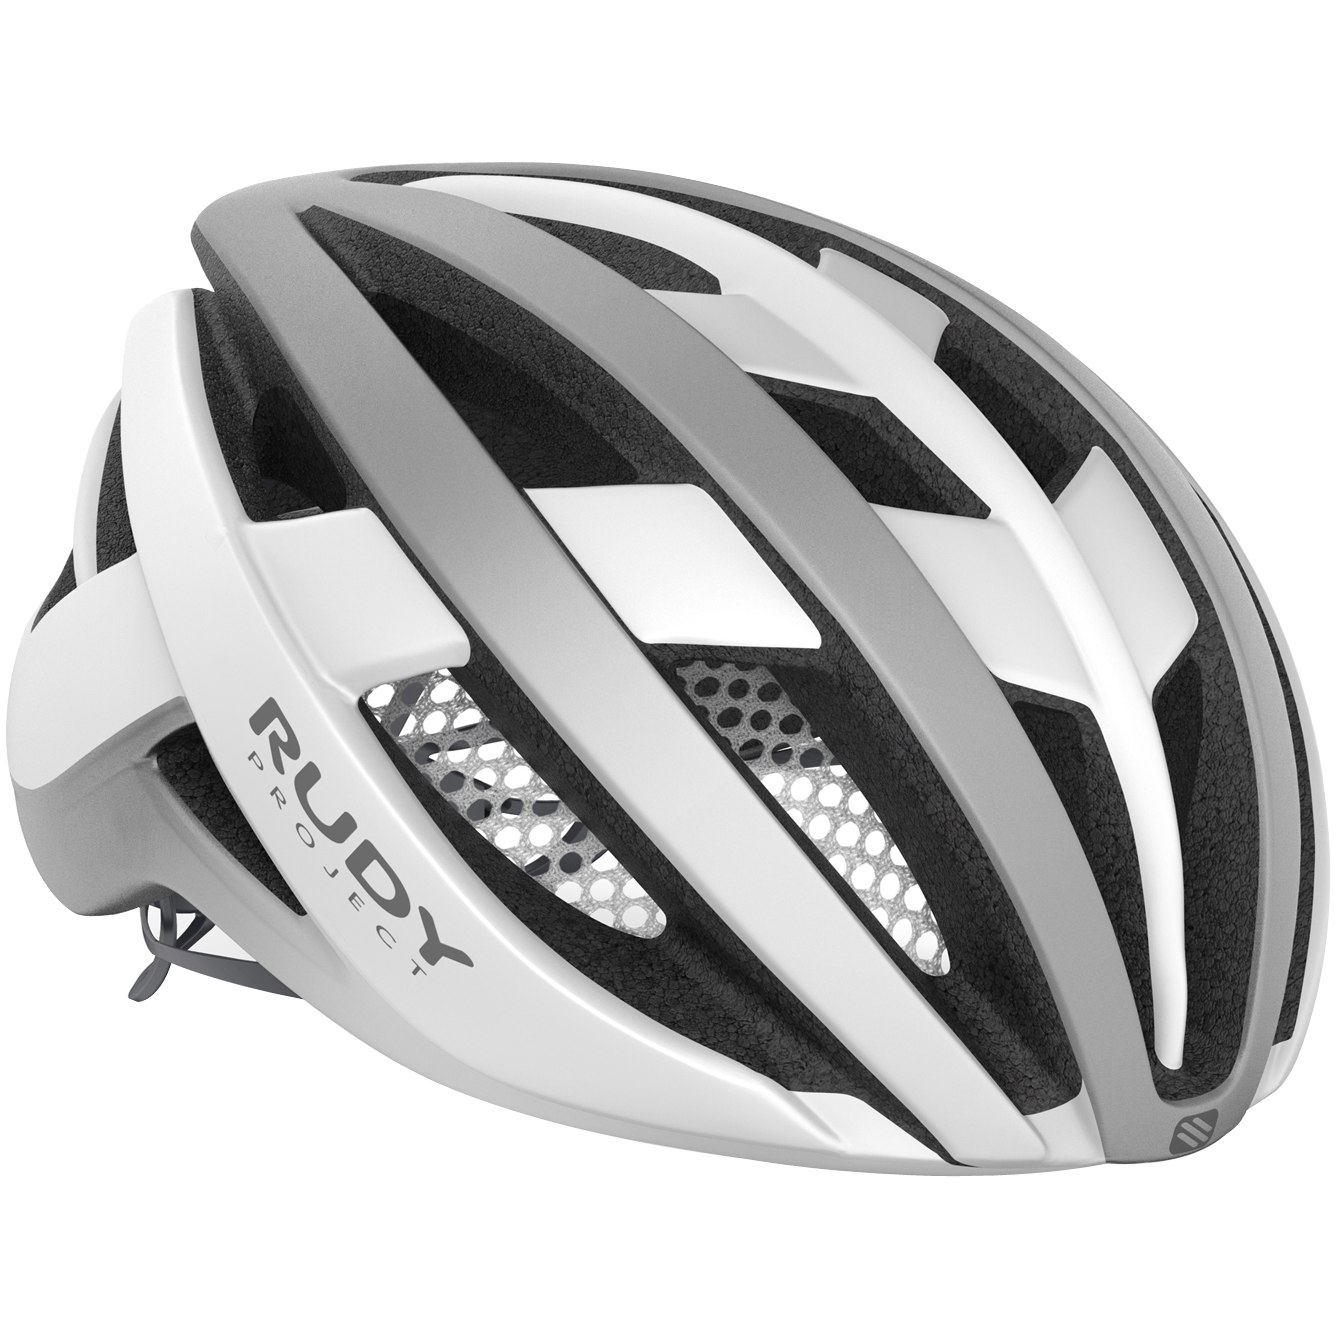 Picture of Rudy Project Venger Helmet - White/Silver (Matte)